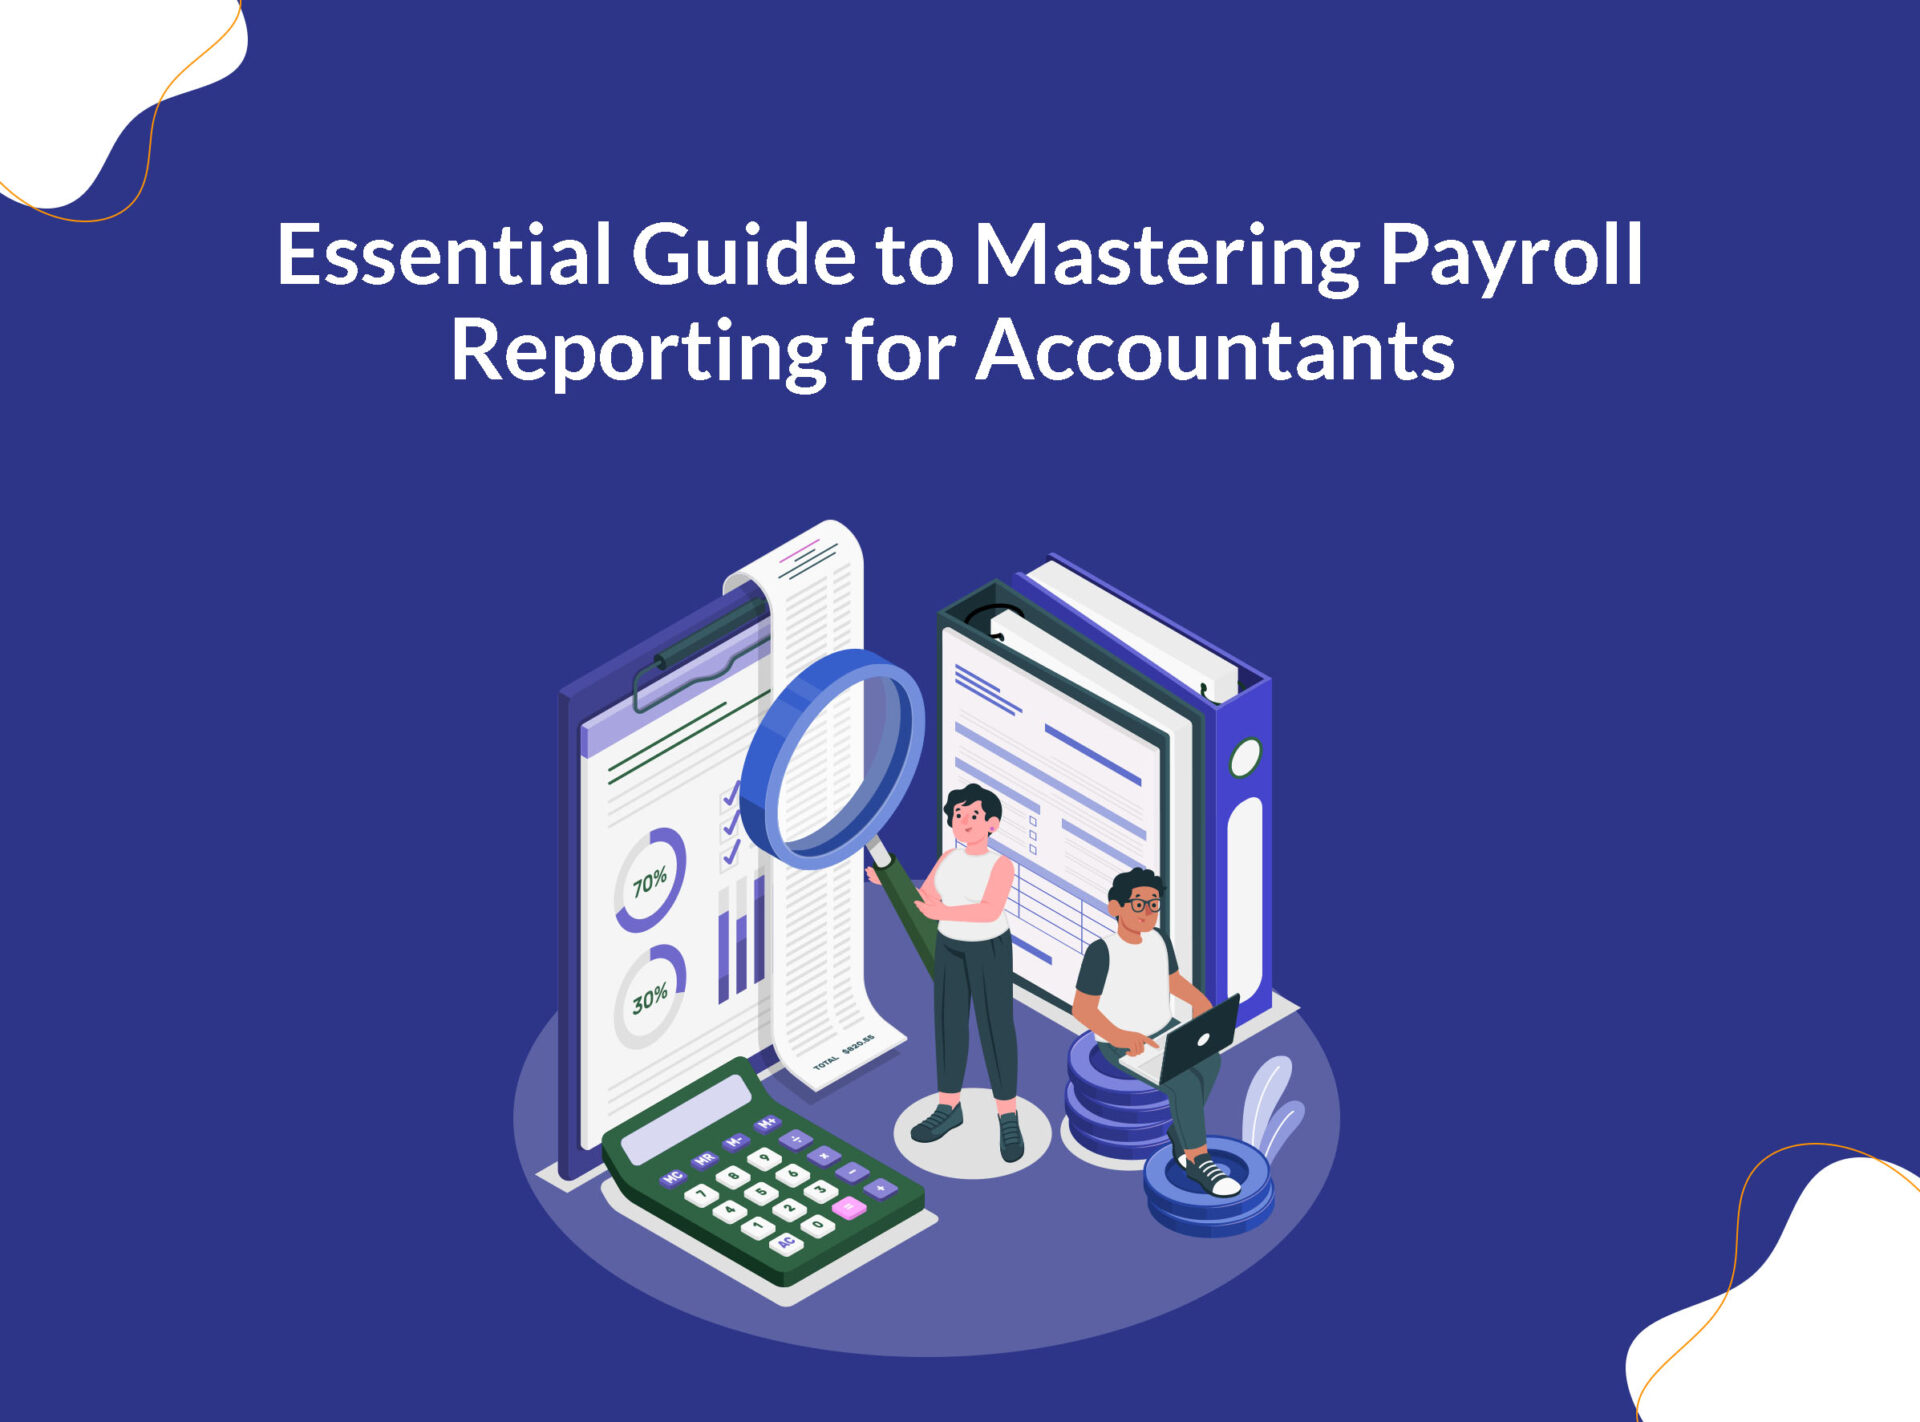 Essential Guide to Mastering Payroll Reporting for Accountants